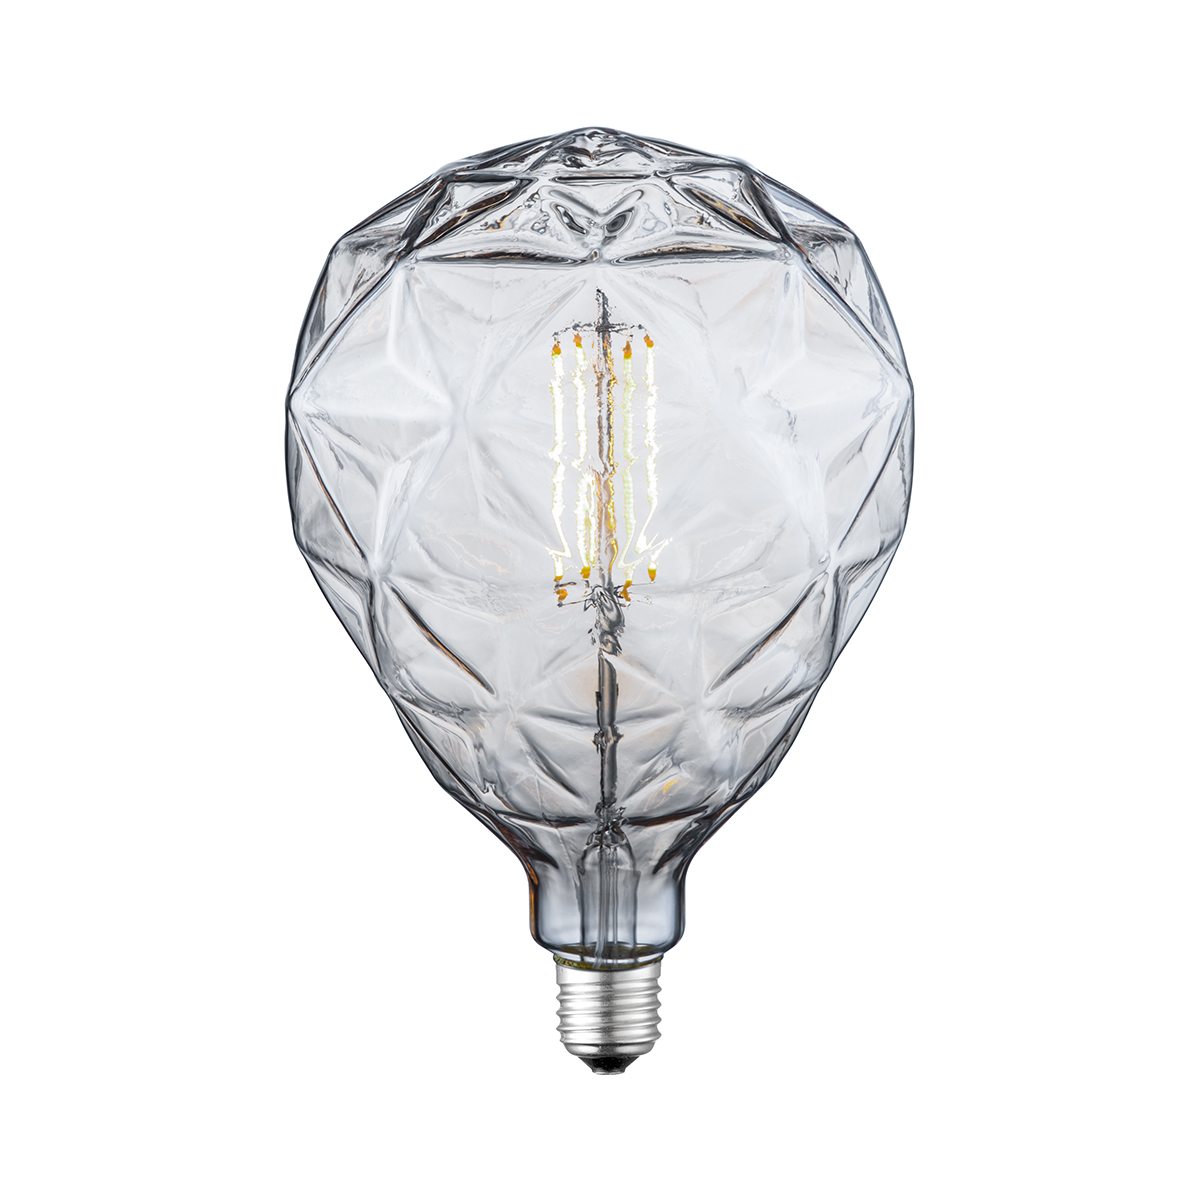 Tangla lighting - TLB-8114-04CL - LED Light Bulb Deco filament - special 4W clear - polytop - dimmable - E27